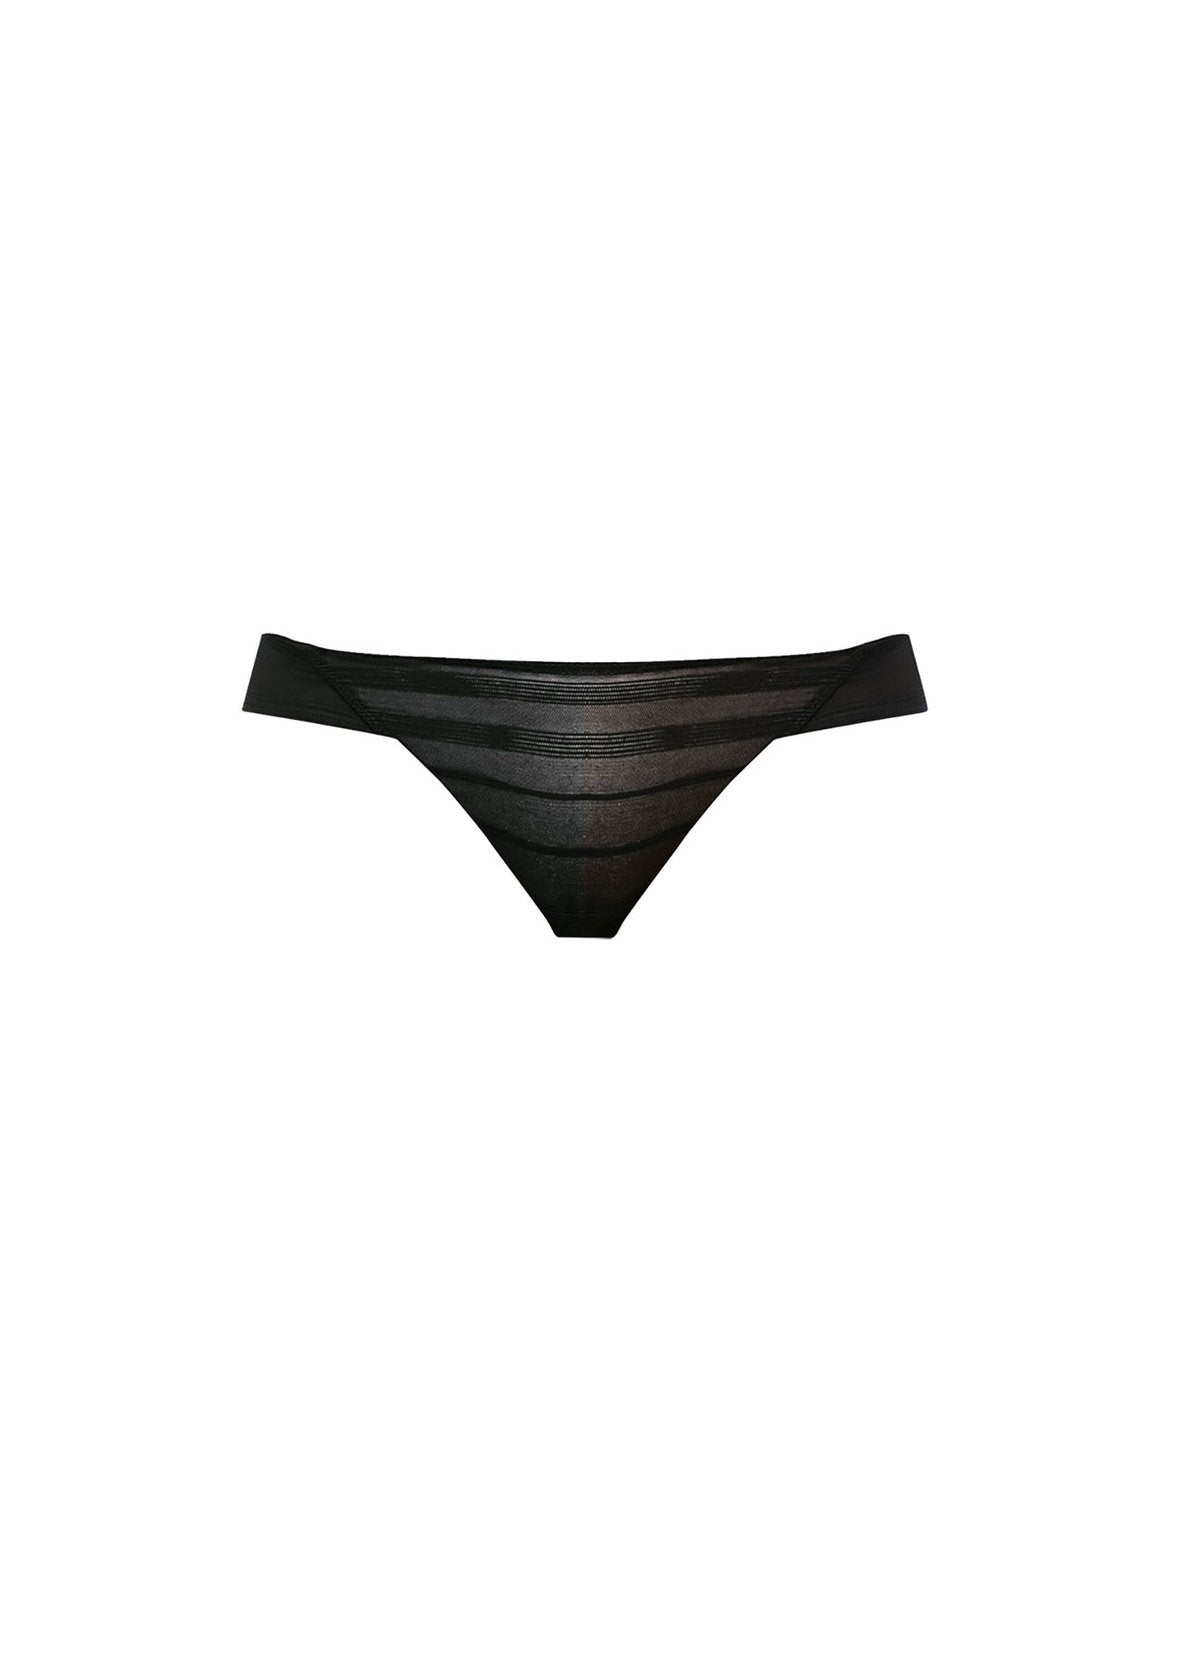 Wacoal Sexy Shaping Tanga - Thongs  Available at Illusions Lingerie